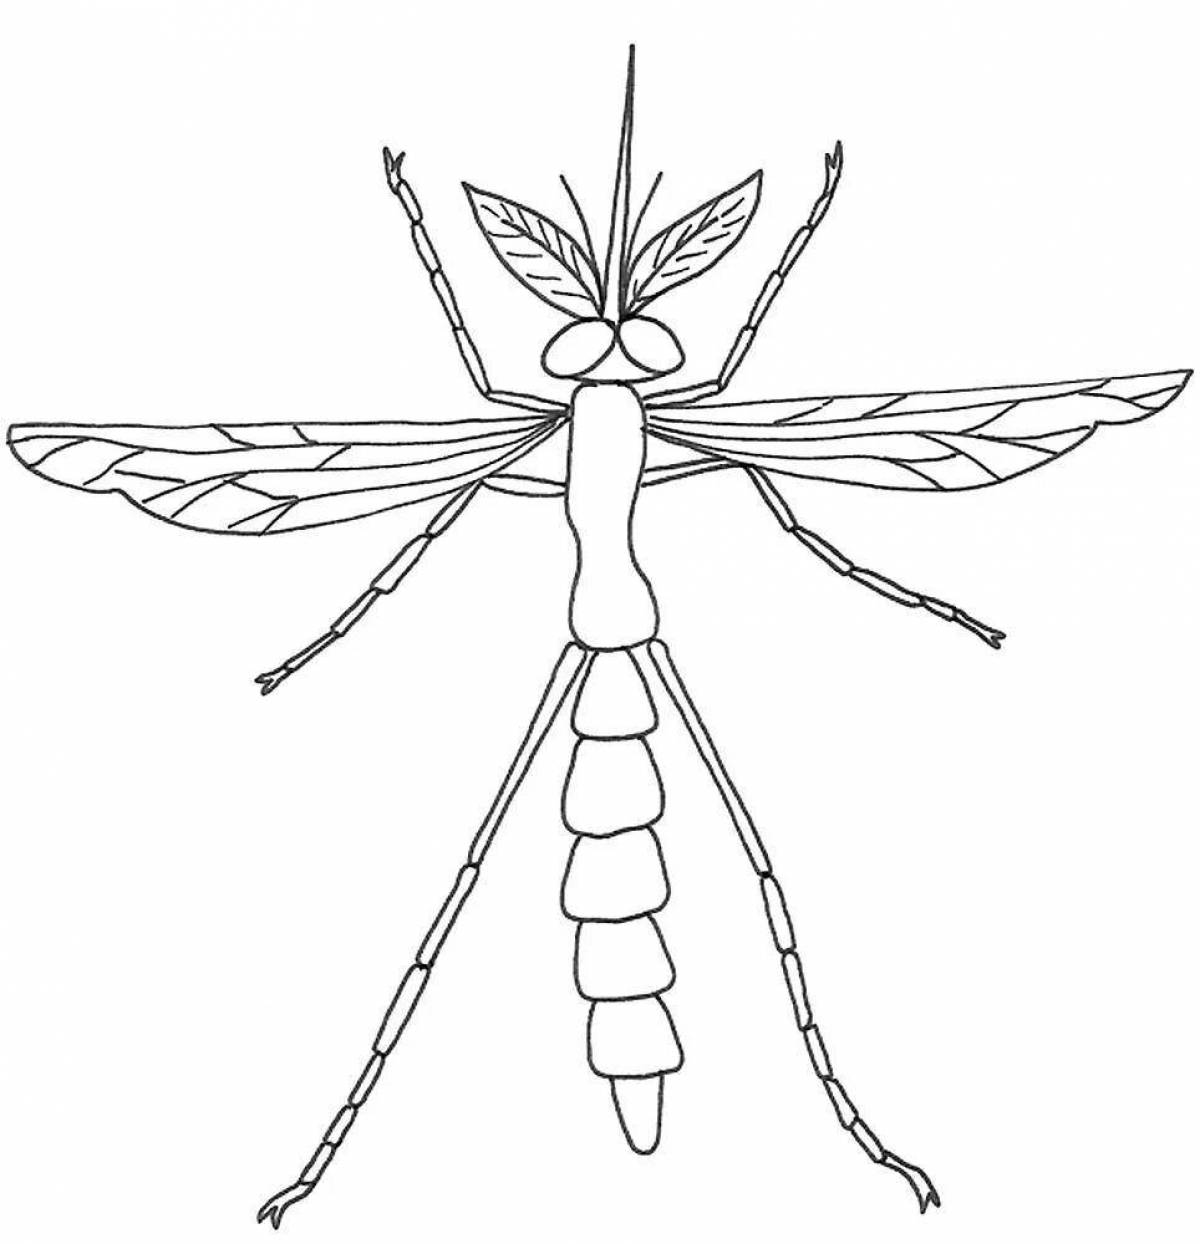 Coloring mosquitoes for kids